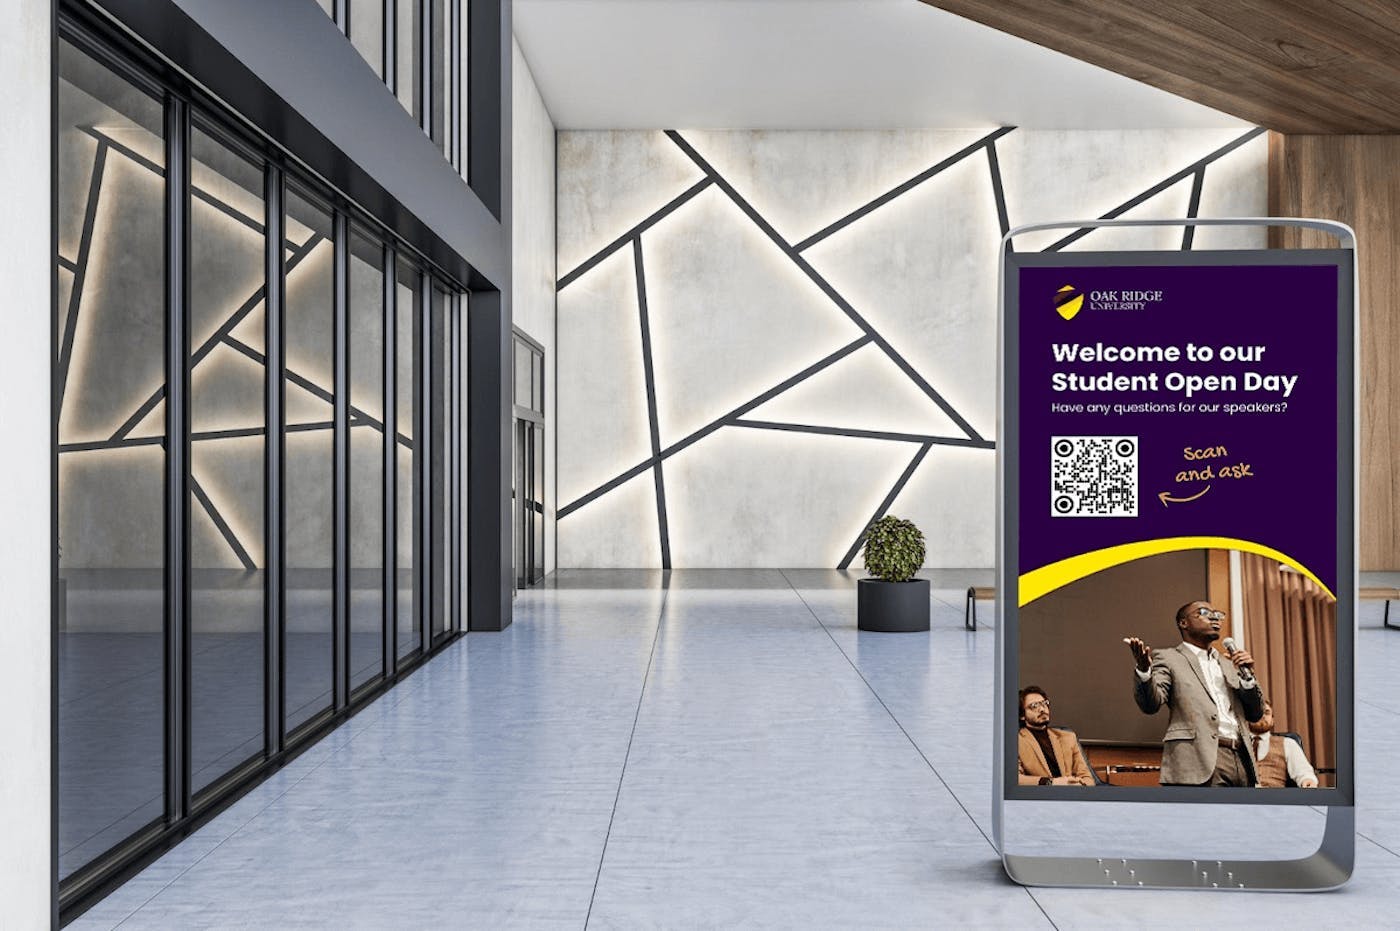 ScreenCloud Article - Using Digital Campus Wayfinding to Improve the Student Experience